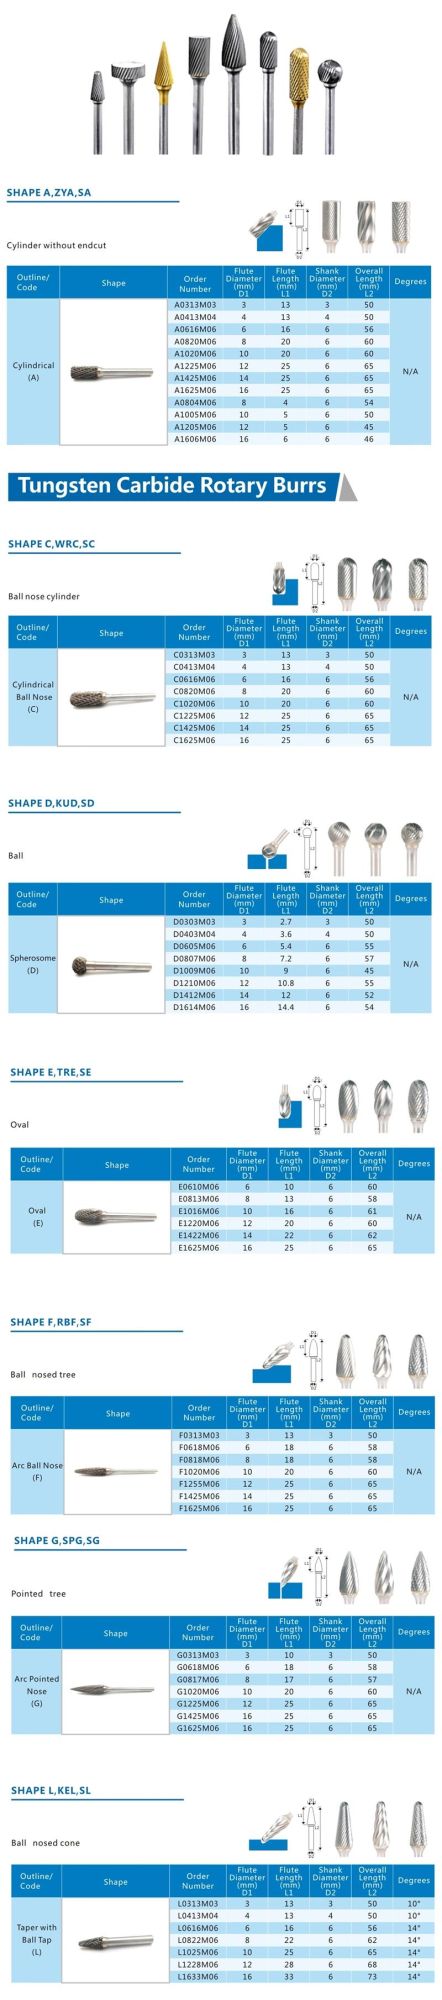 Standard Cemented Carbide Rotary Burr and Deburring Tools